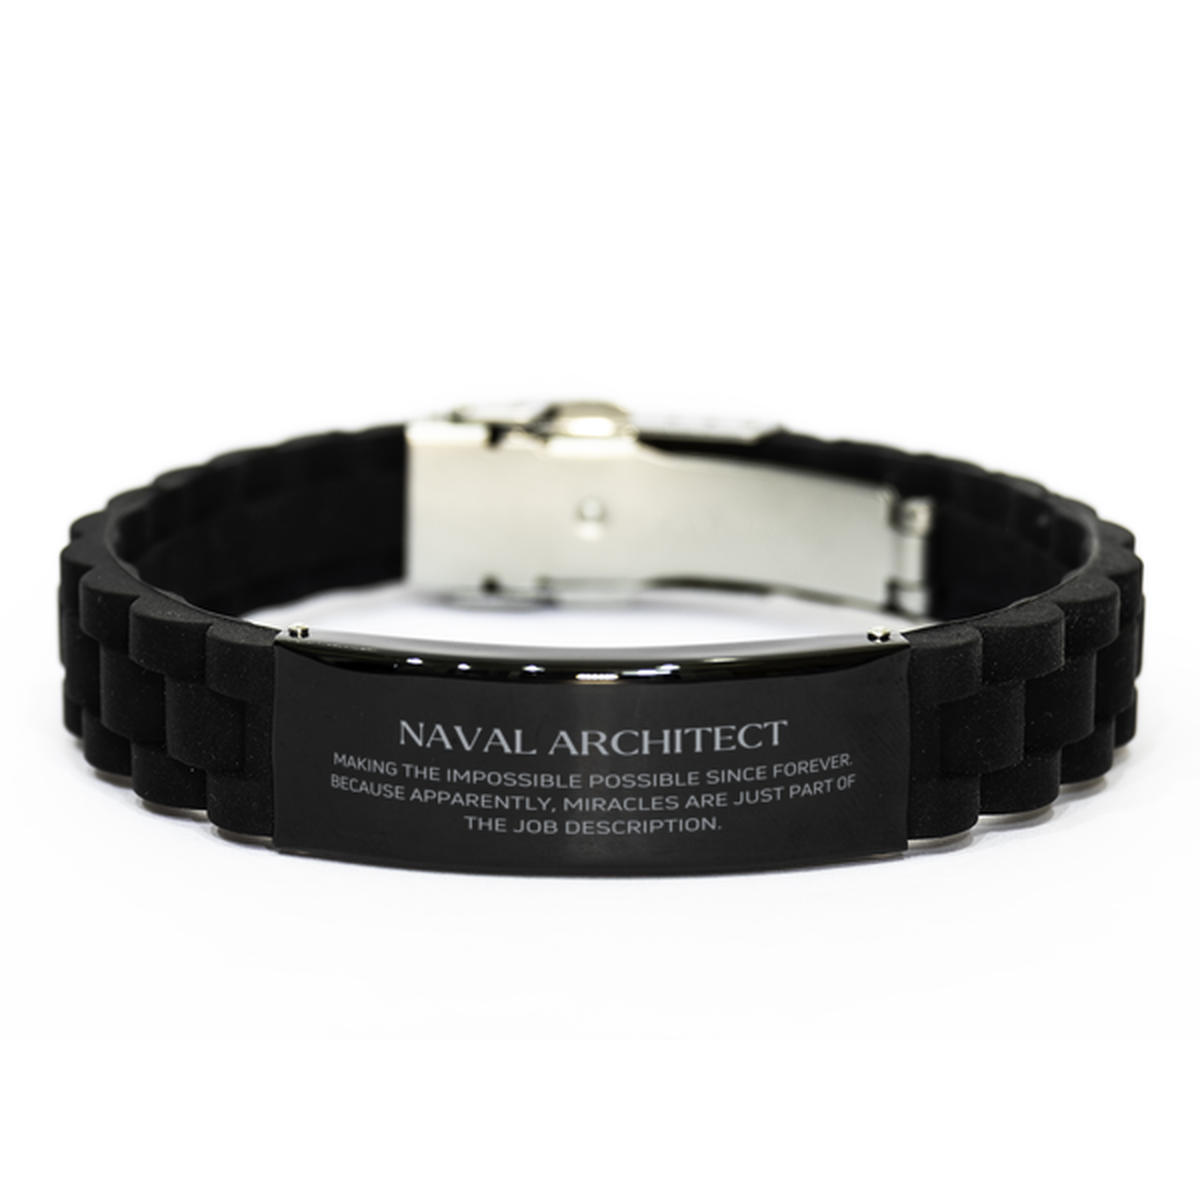 Funny Naval Architect Gifts, Miracles are just part of the job description, Inspirational Birthday Black Glidelock Clasp Bracelet For Naval Architect, Men, Women, Coworkers, Friends, Boss